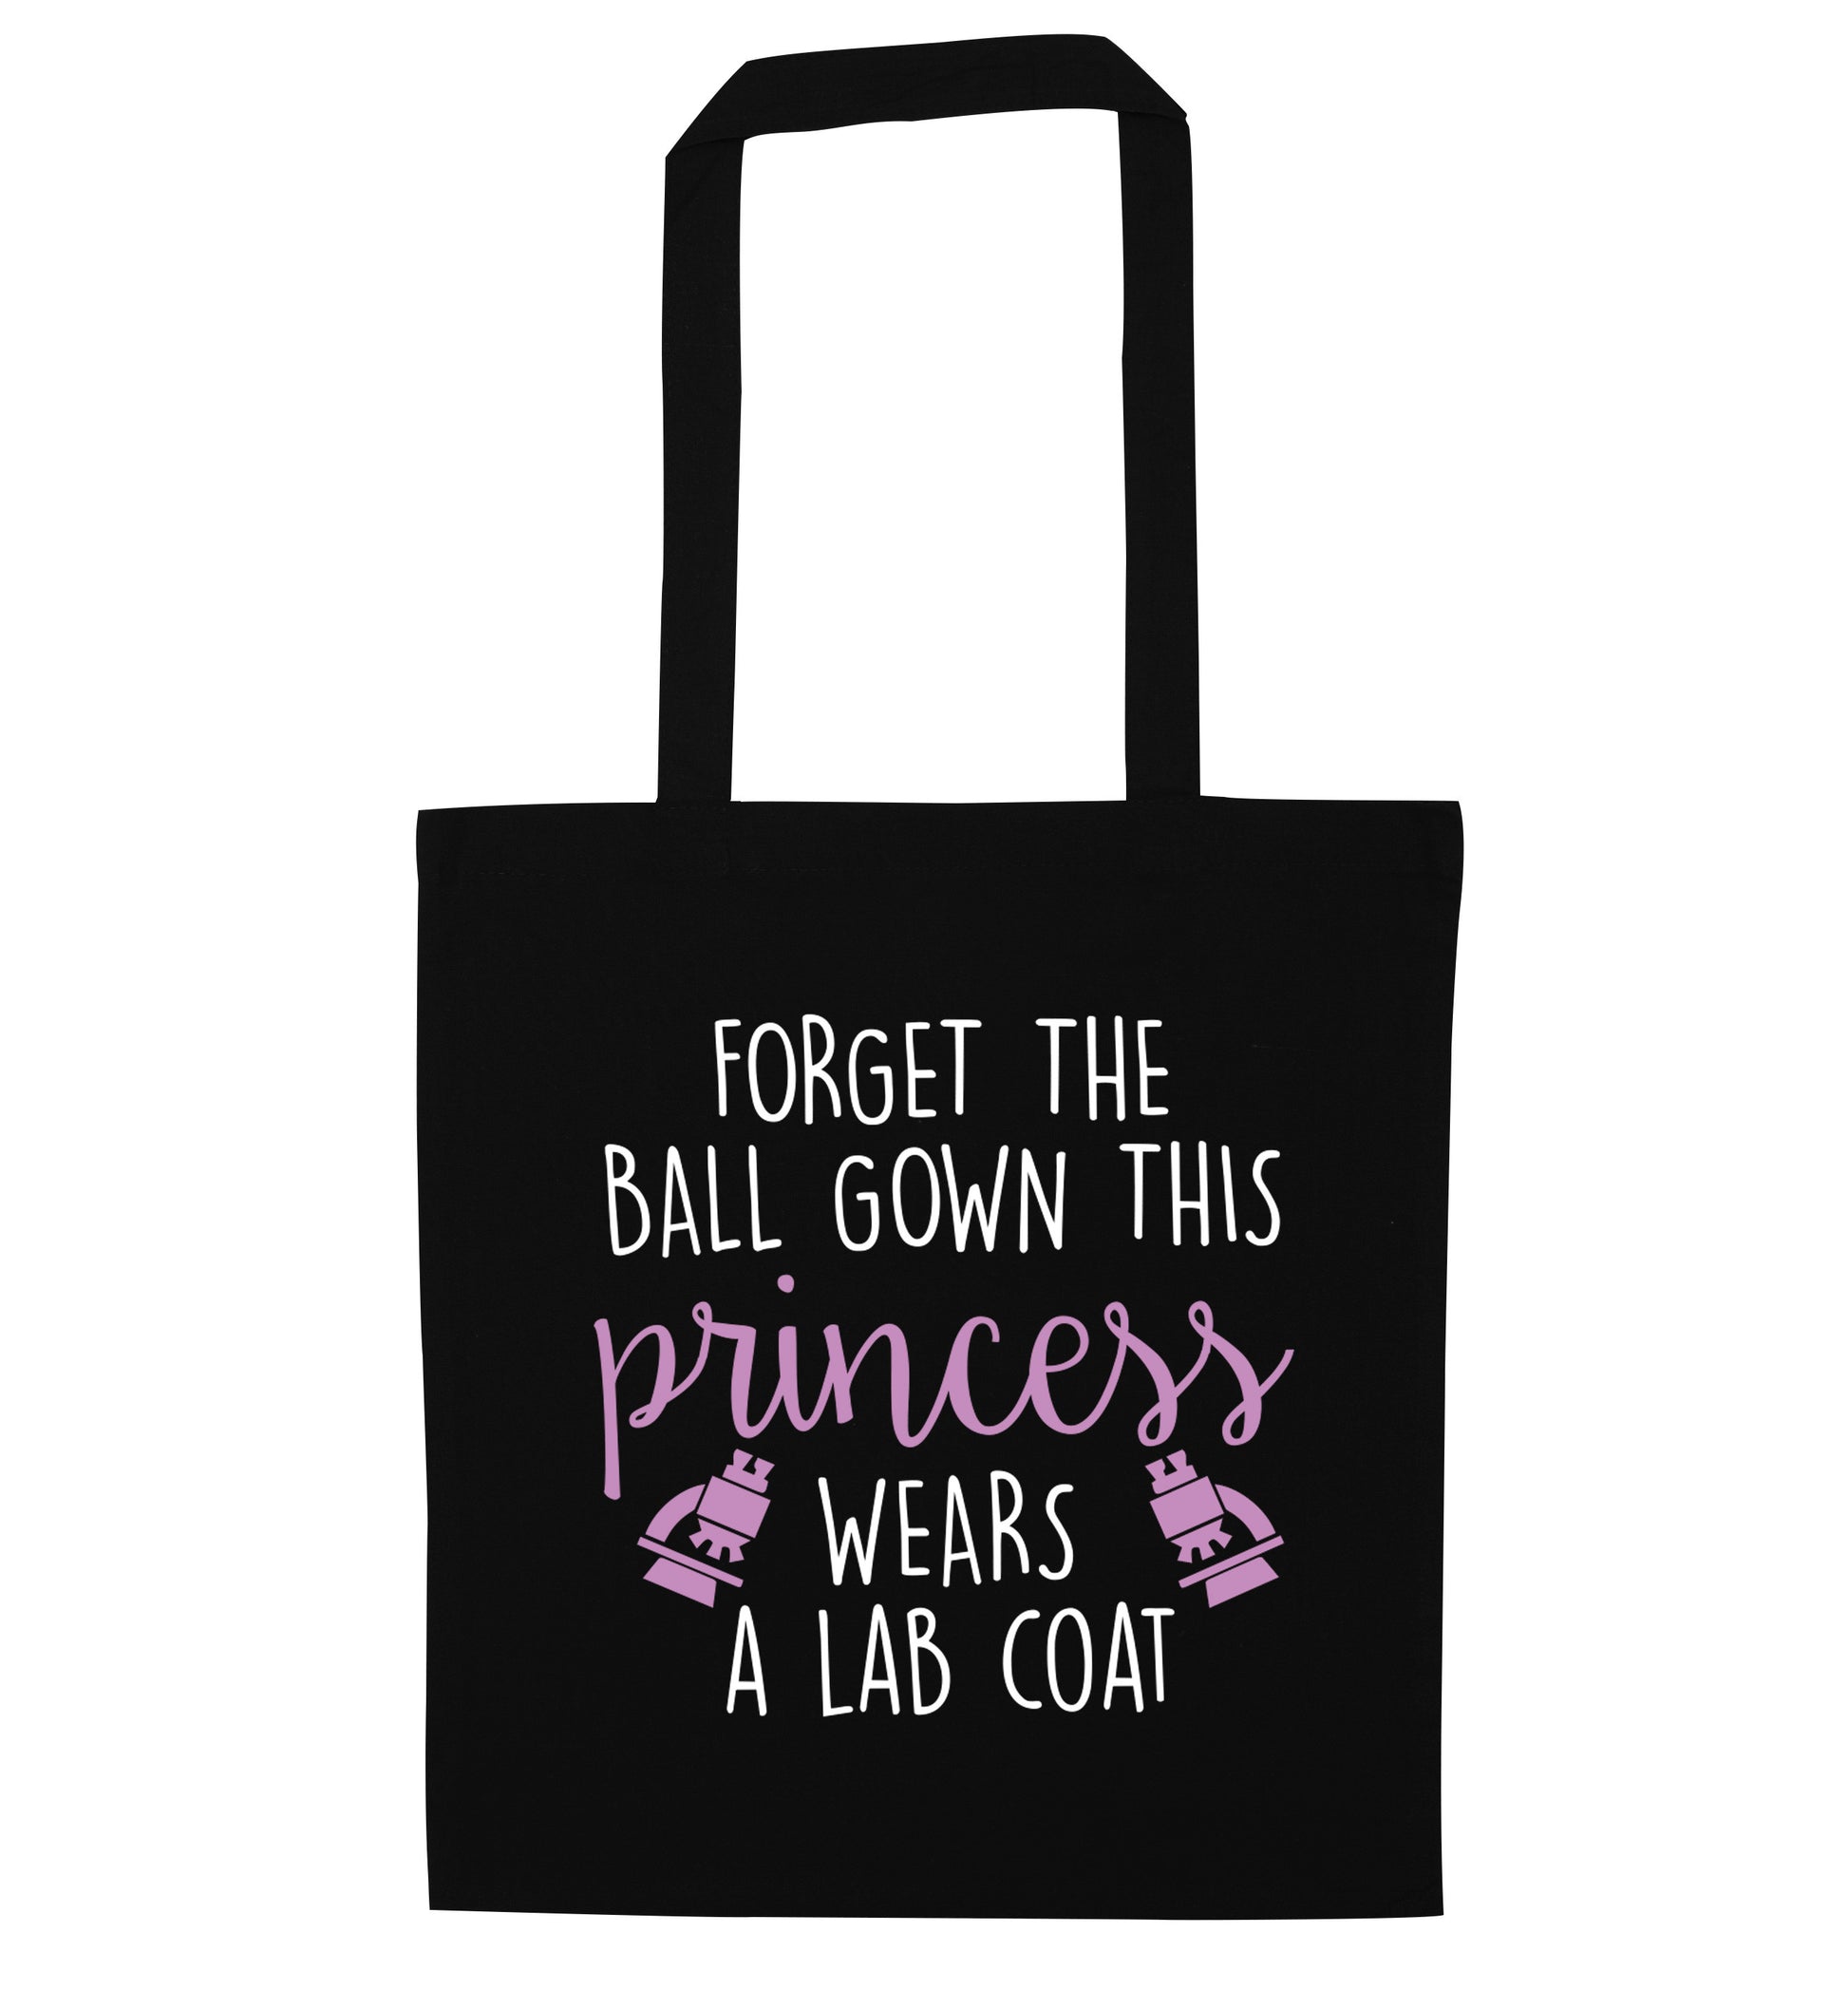 Forget the ball gown this princess wears a lab coat black tote bag